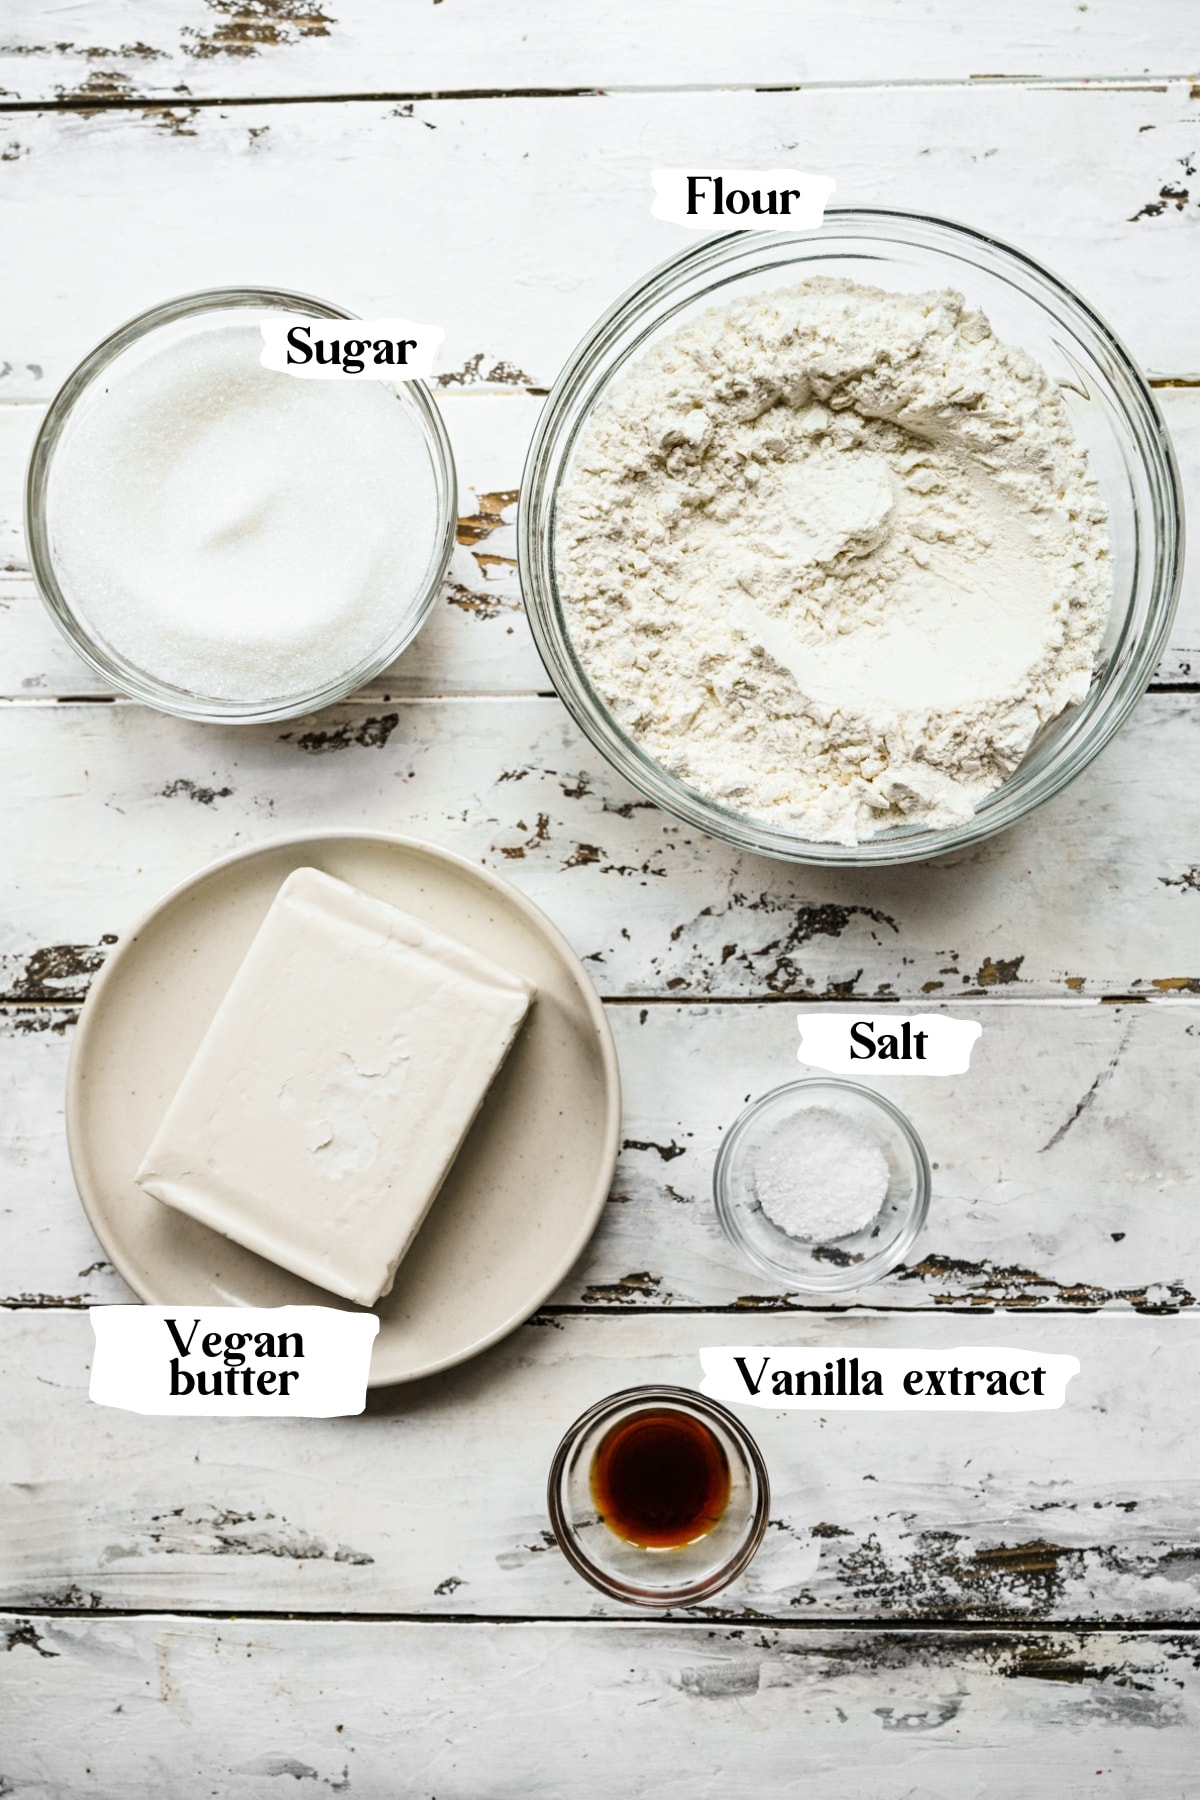 Overhead view of ingredients for vegan butter cookies, including flour, salt, sugar, butter and vanilla.